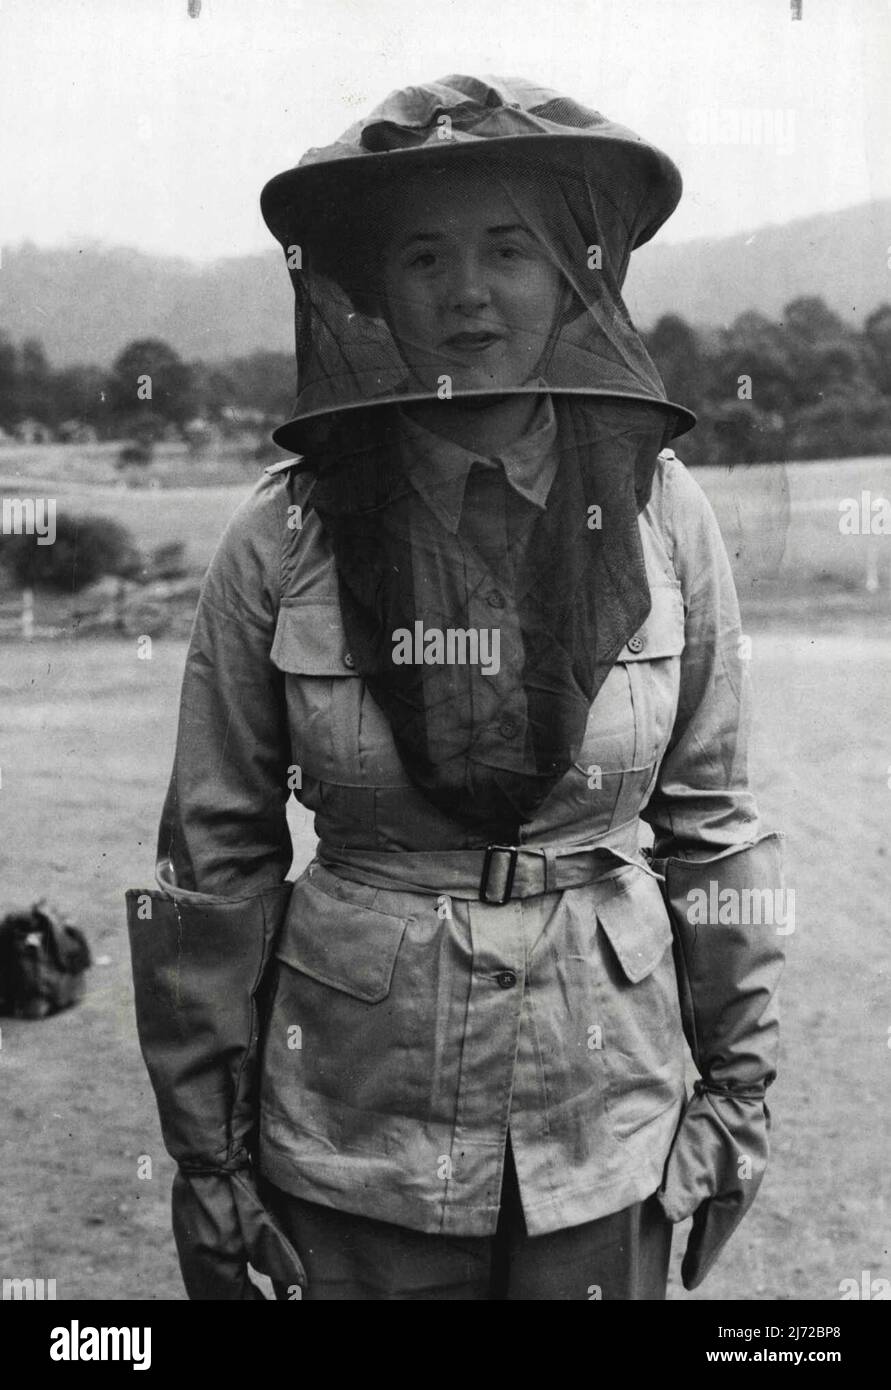 Fashion in N.G. Veils - Special outdoor tropical uniform are issued to members of the Australian Army Medical Women's Service before they ***** Australia of New Guinea. picture shows mosquito veil, ***** over the wide-brimmed khaki hat. September 13, 1943. Stock Photo